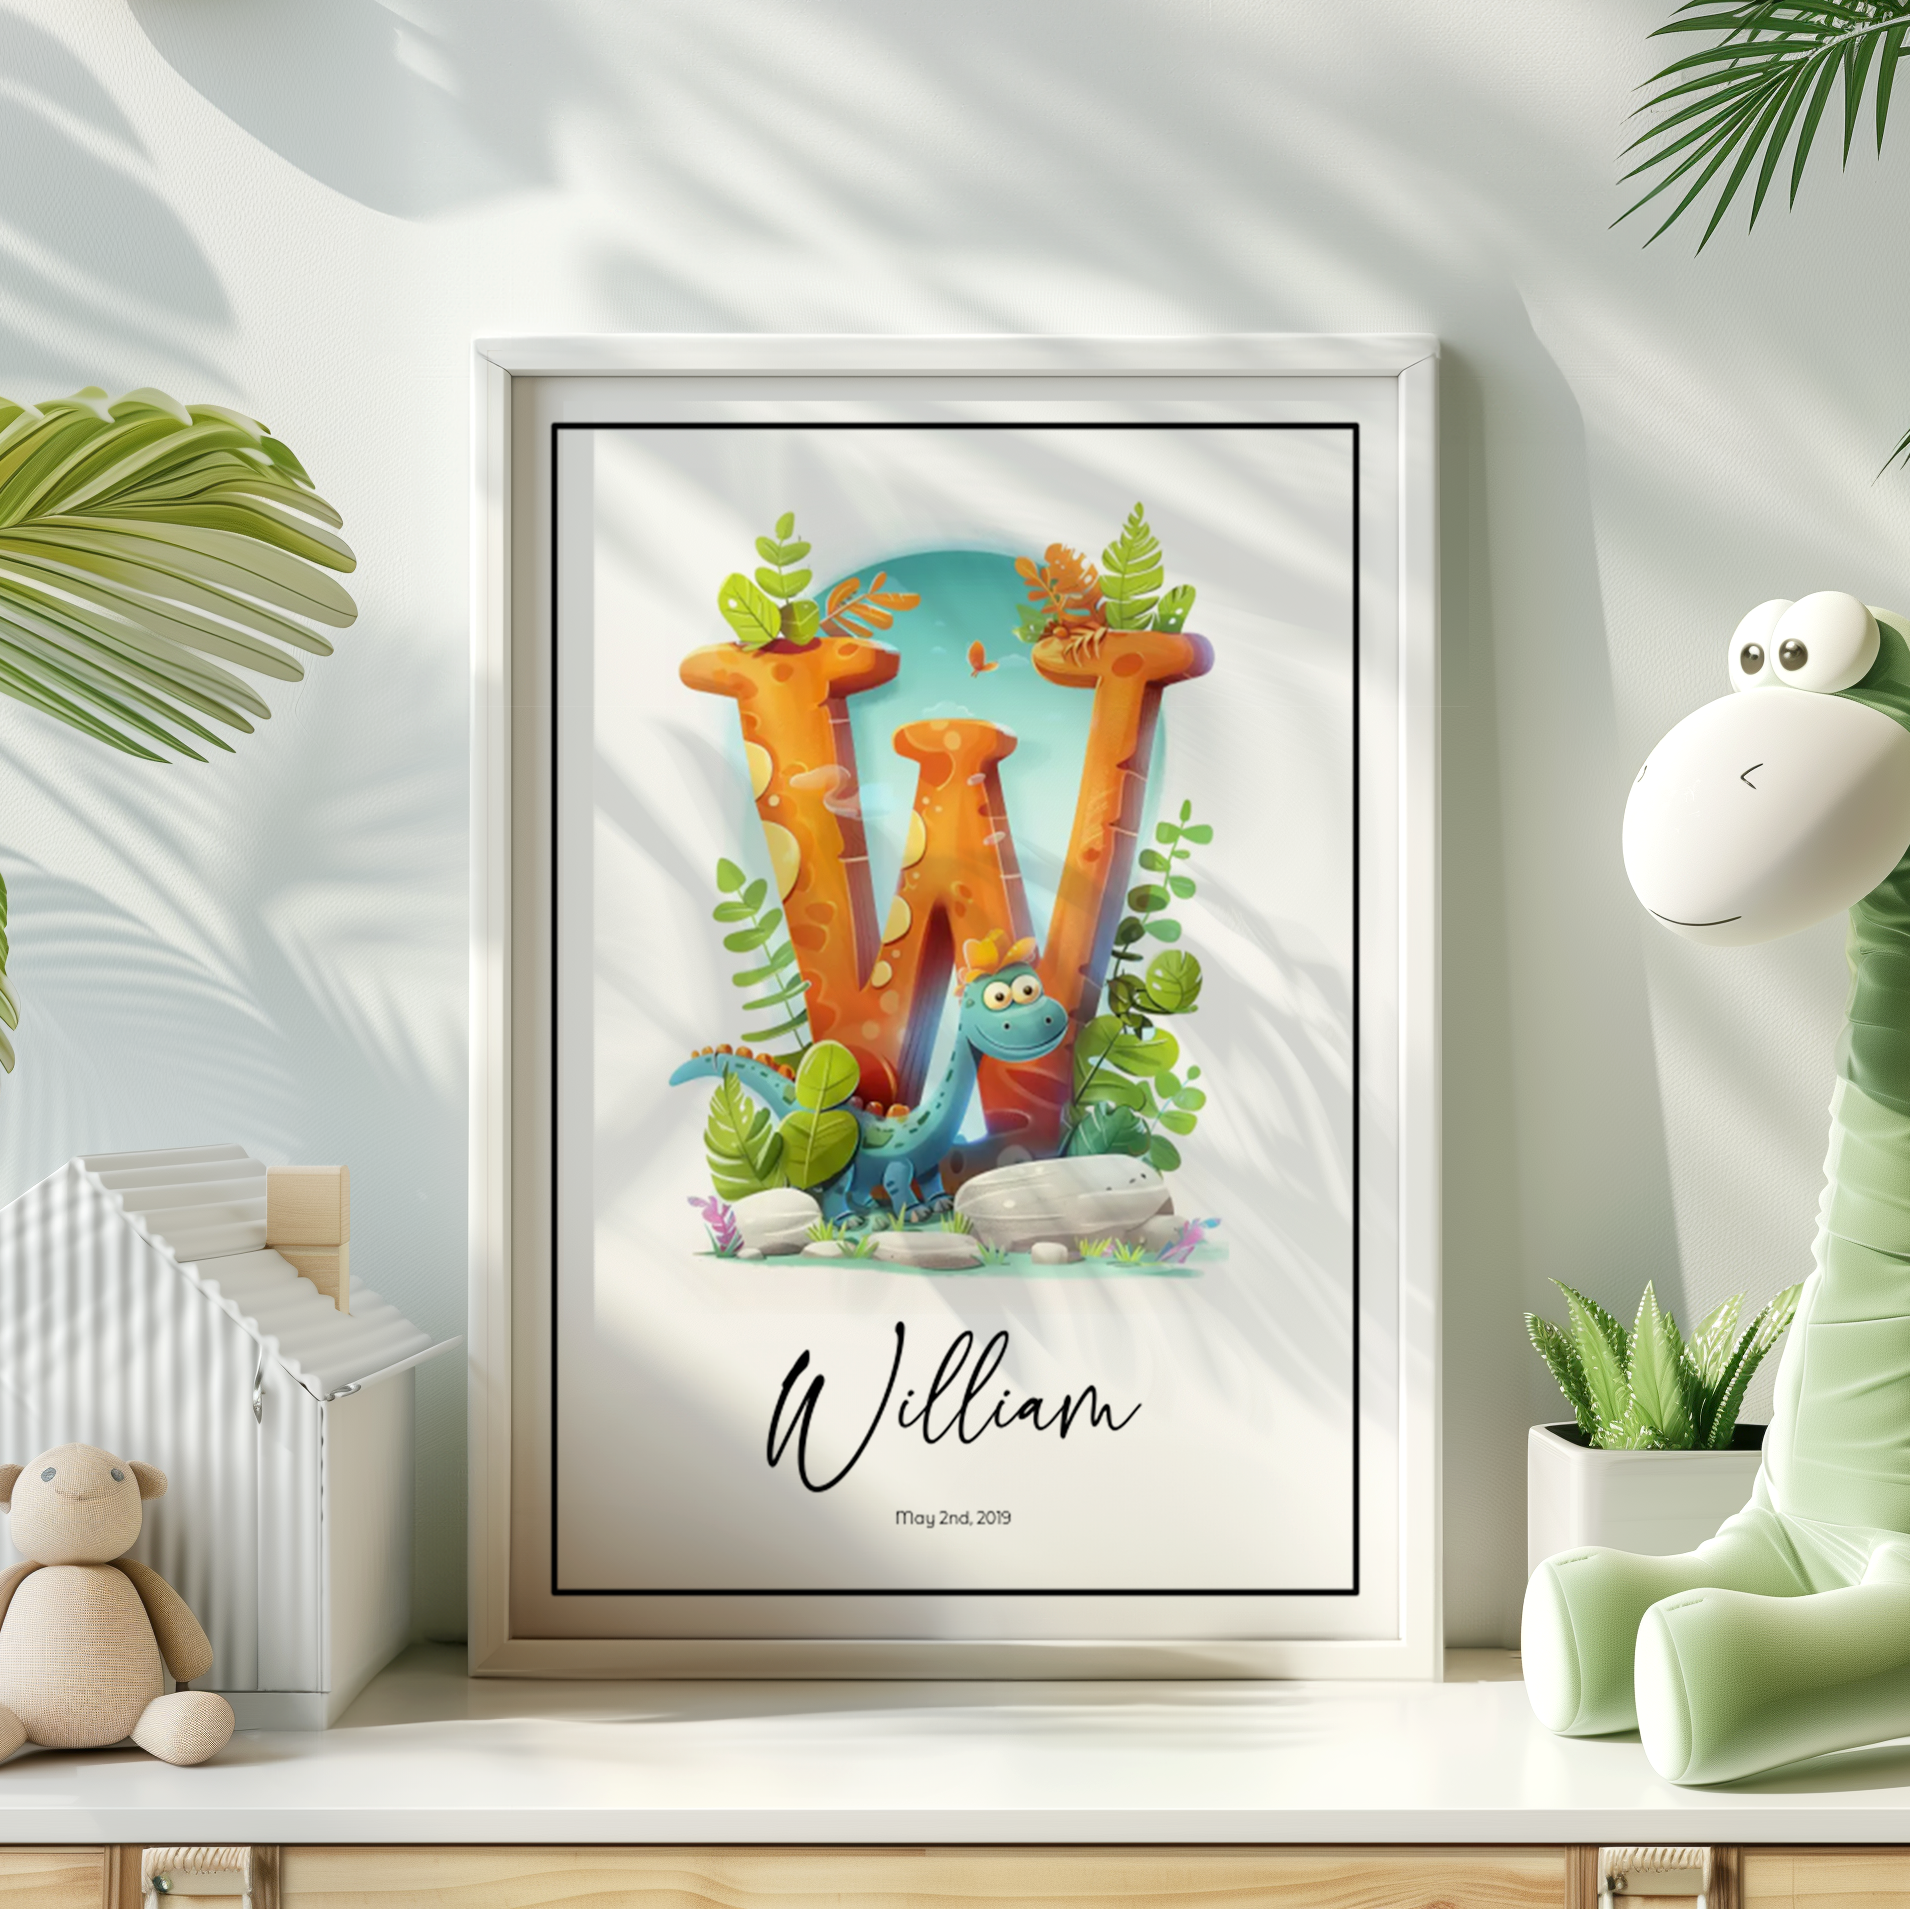 Poster featuring a W letter illustrated with dinosaur,  name William and birthday